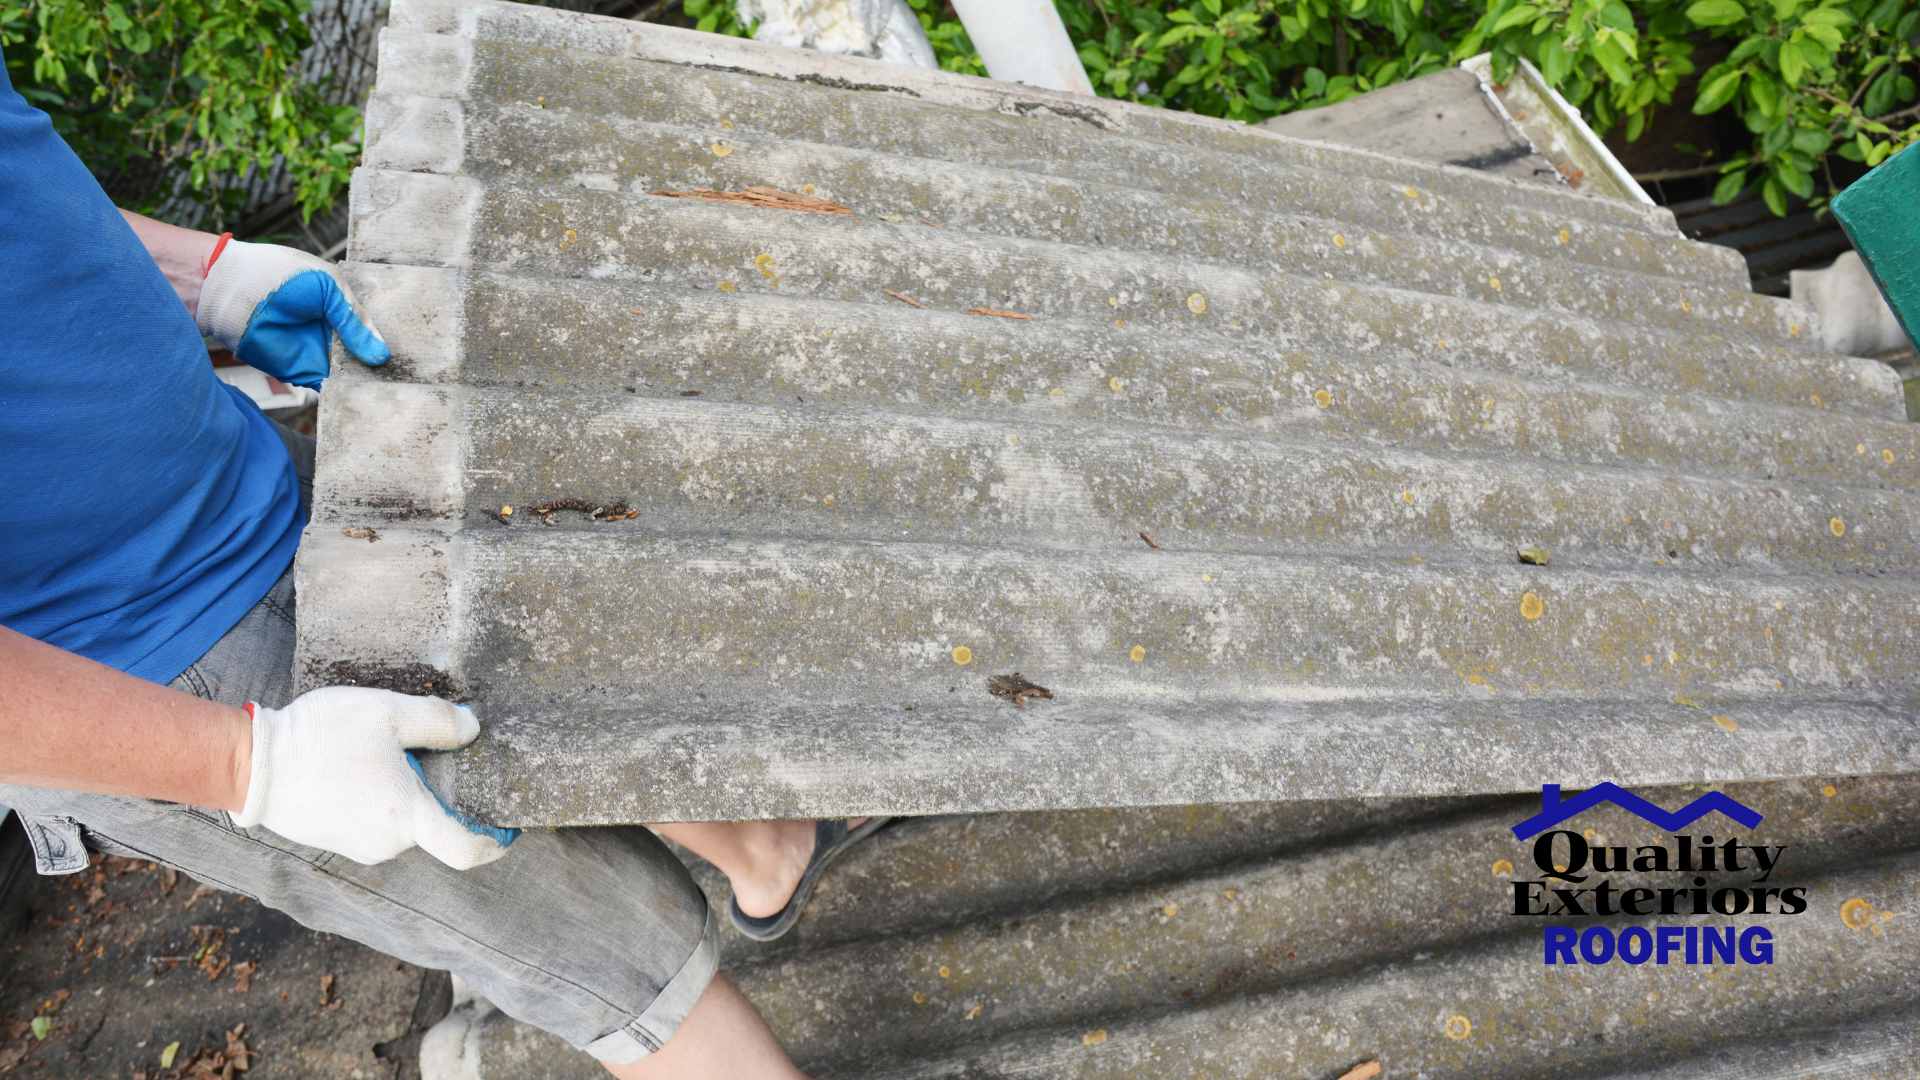 How to Dispose of Asbestos Roofing Shingles